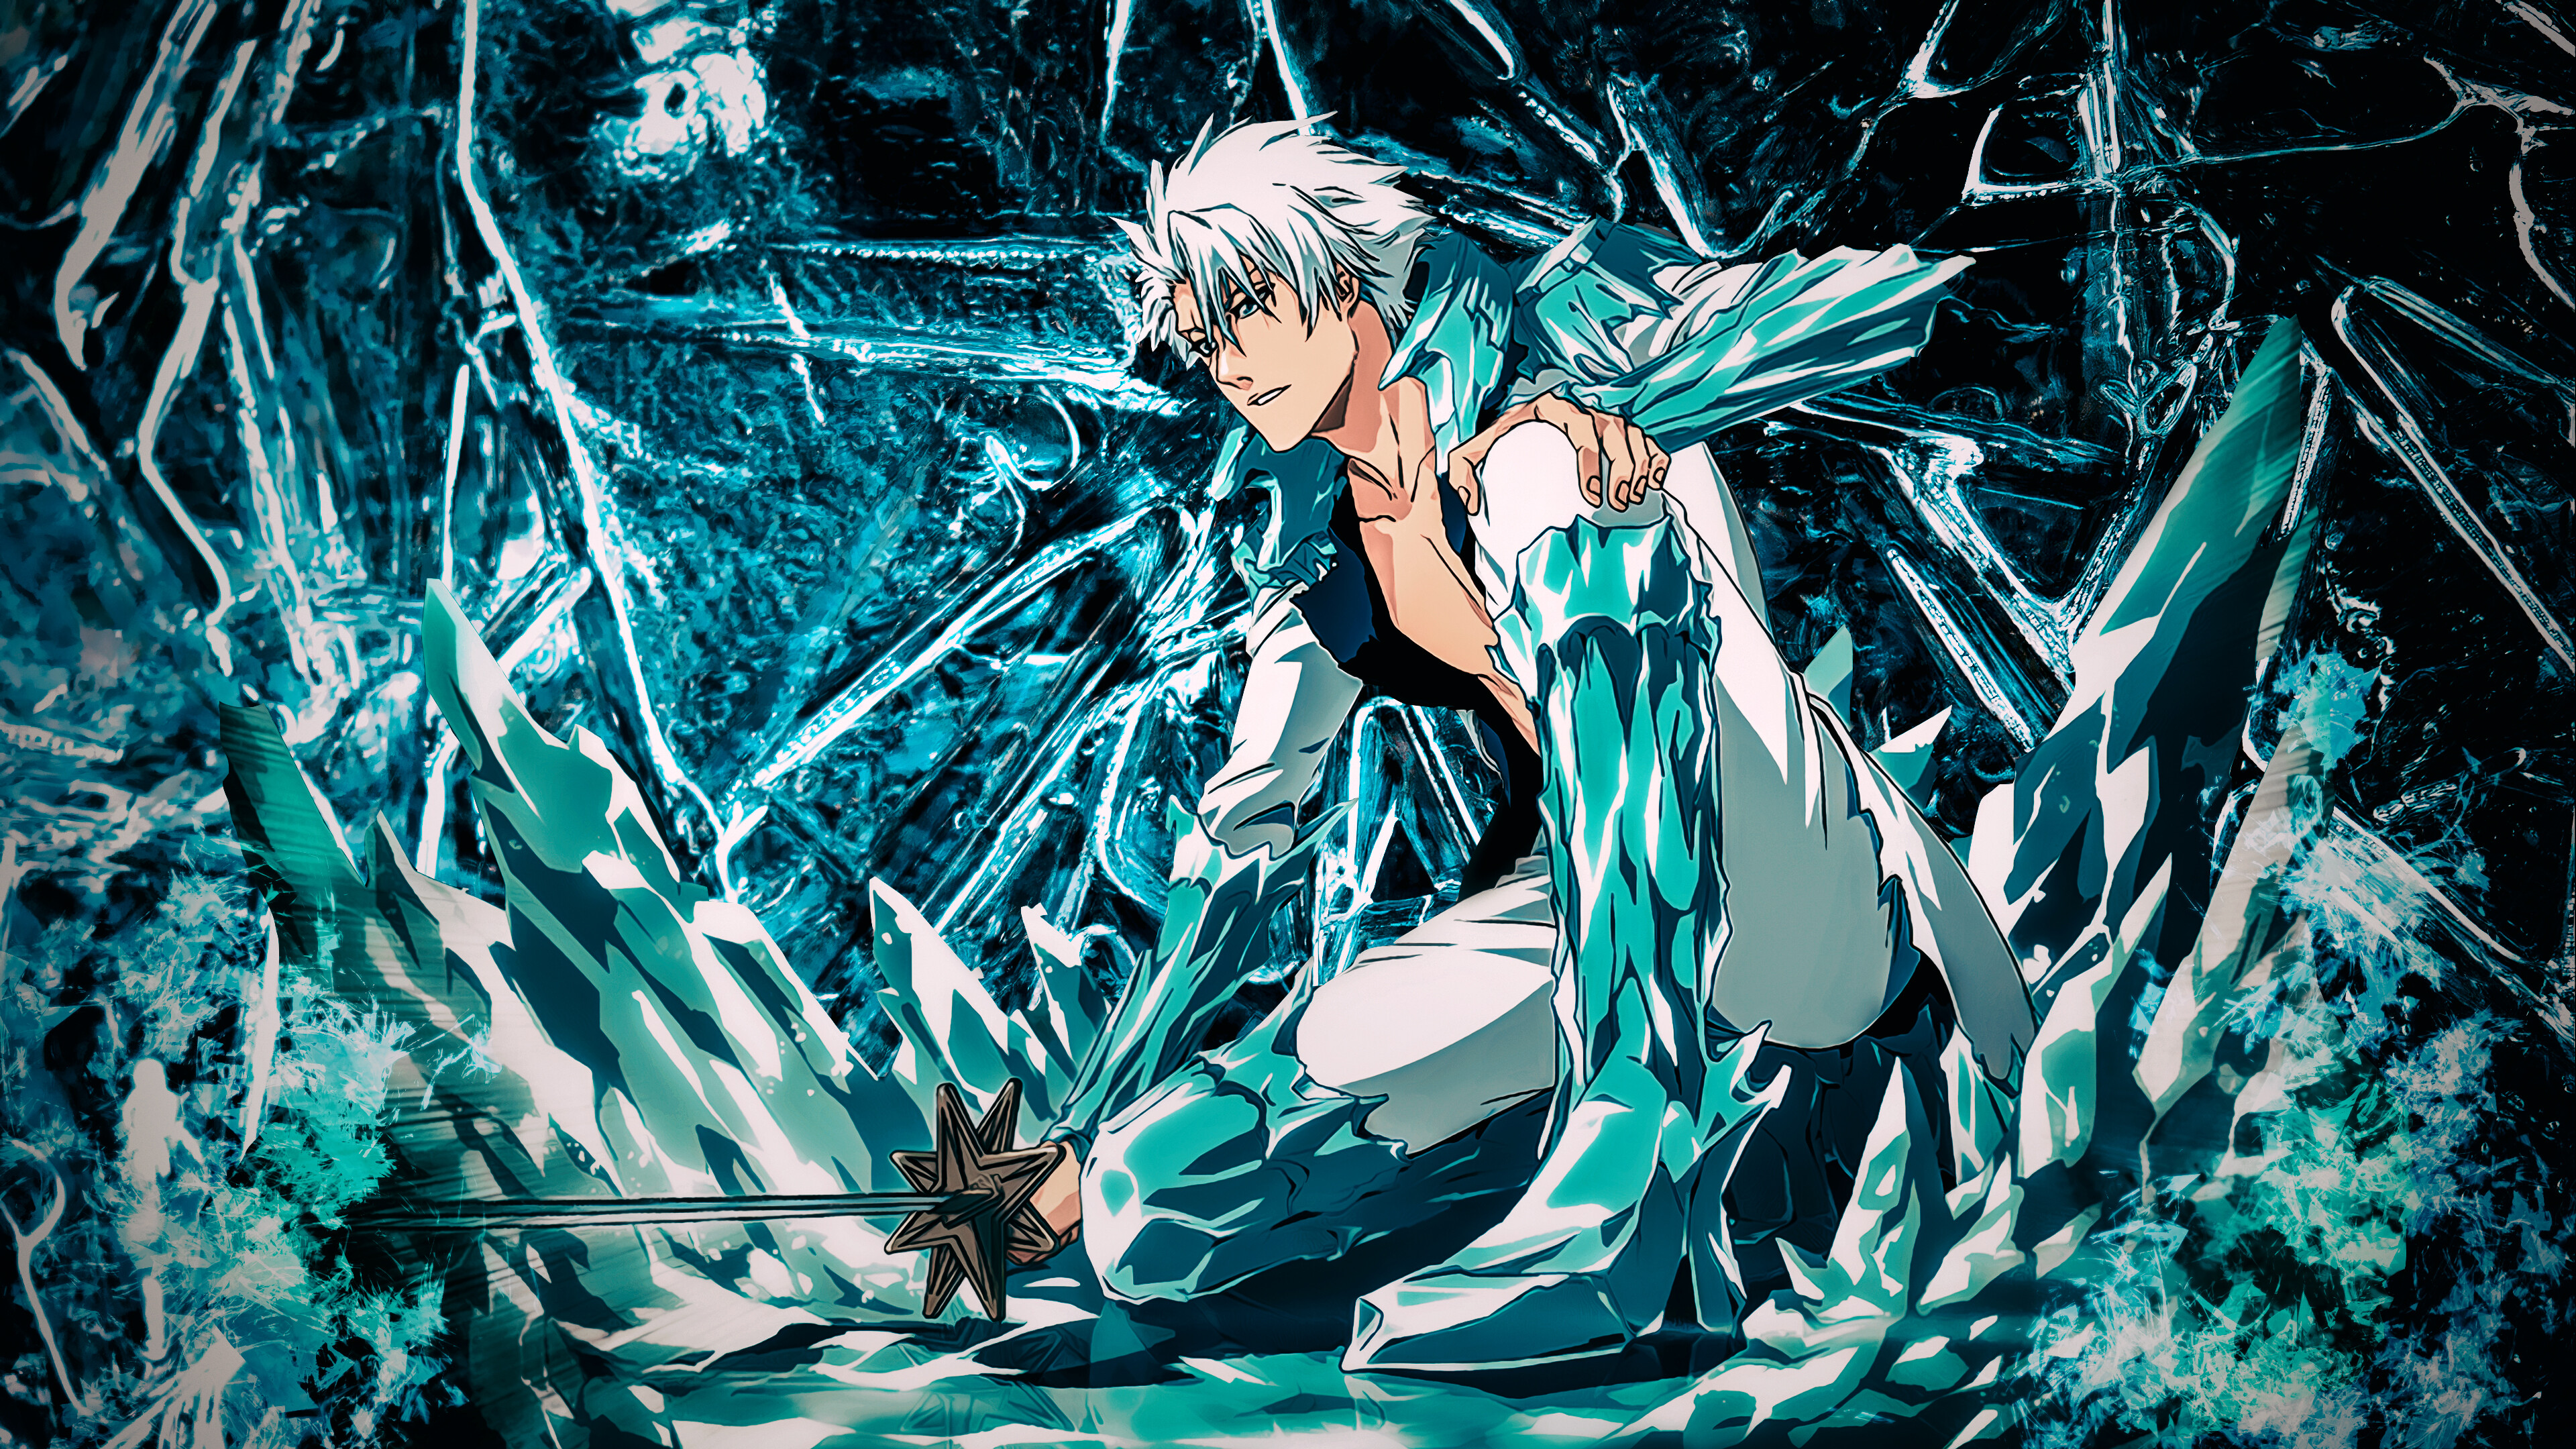 Bleach: Toshiro Hitsugaya, the captain of the 10th Division in the Gotei 13. 3840x2160 4K Background.